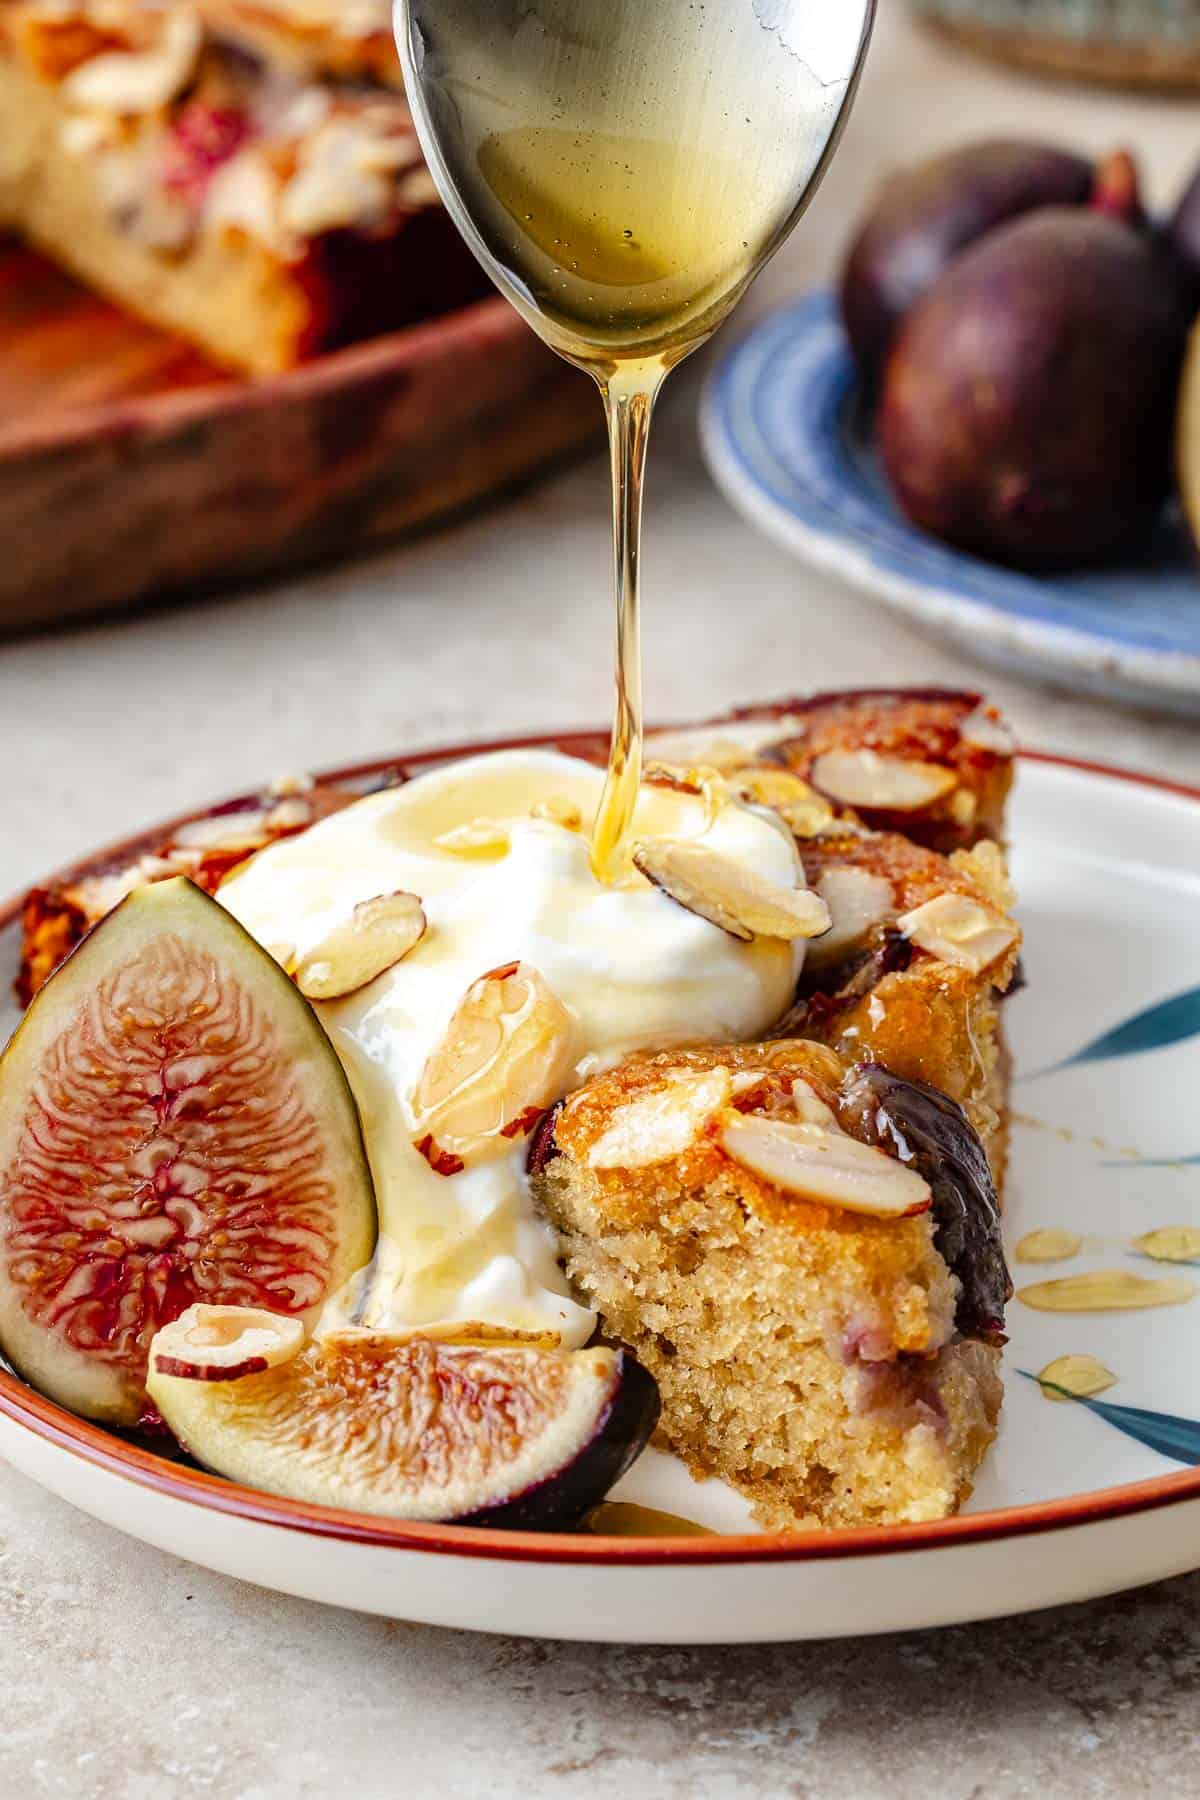 Honey being drizzled on a slice of fig cake.